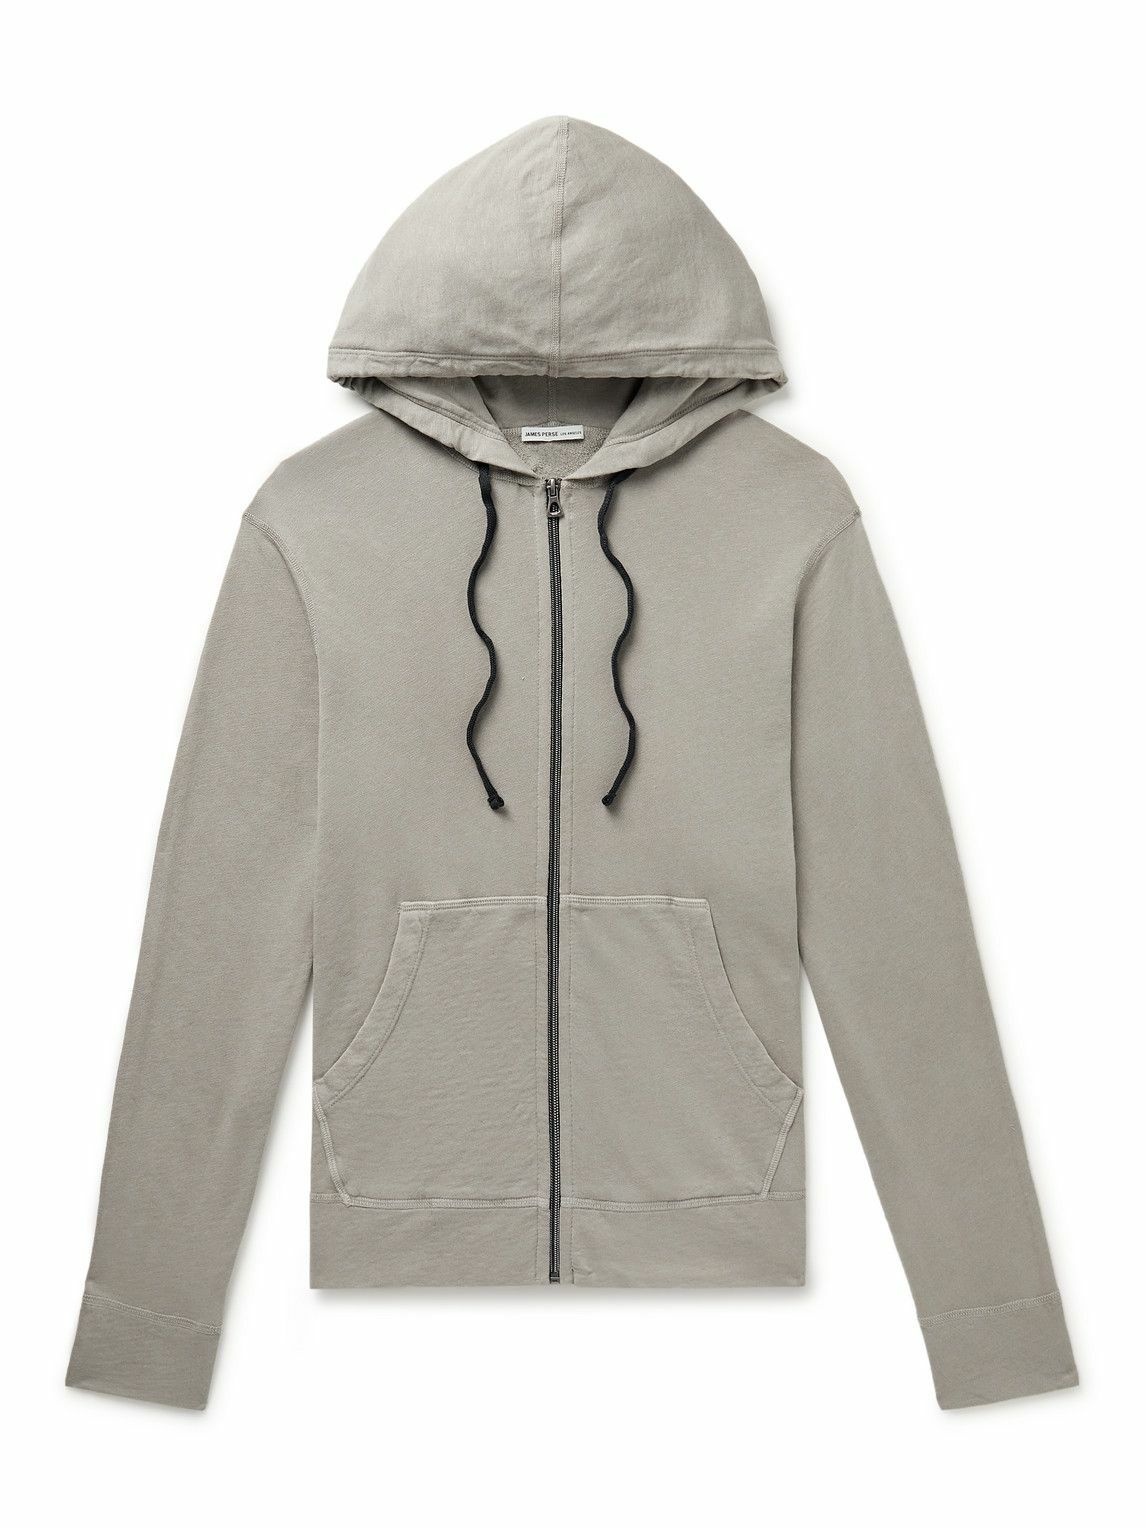 James Perse - Supima Cotton-Jersey Zip-Up Hoodie - Gray James Perse